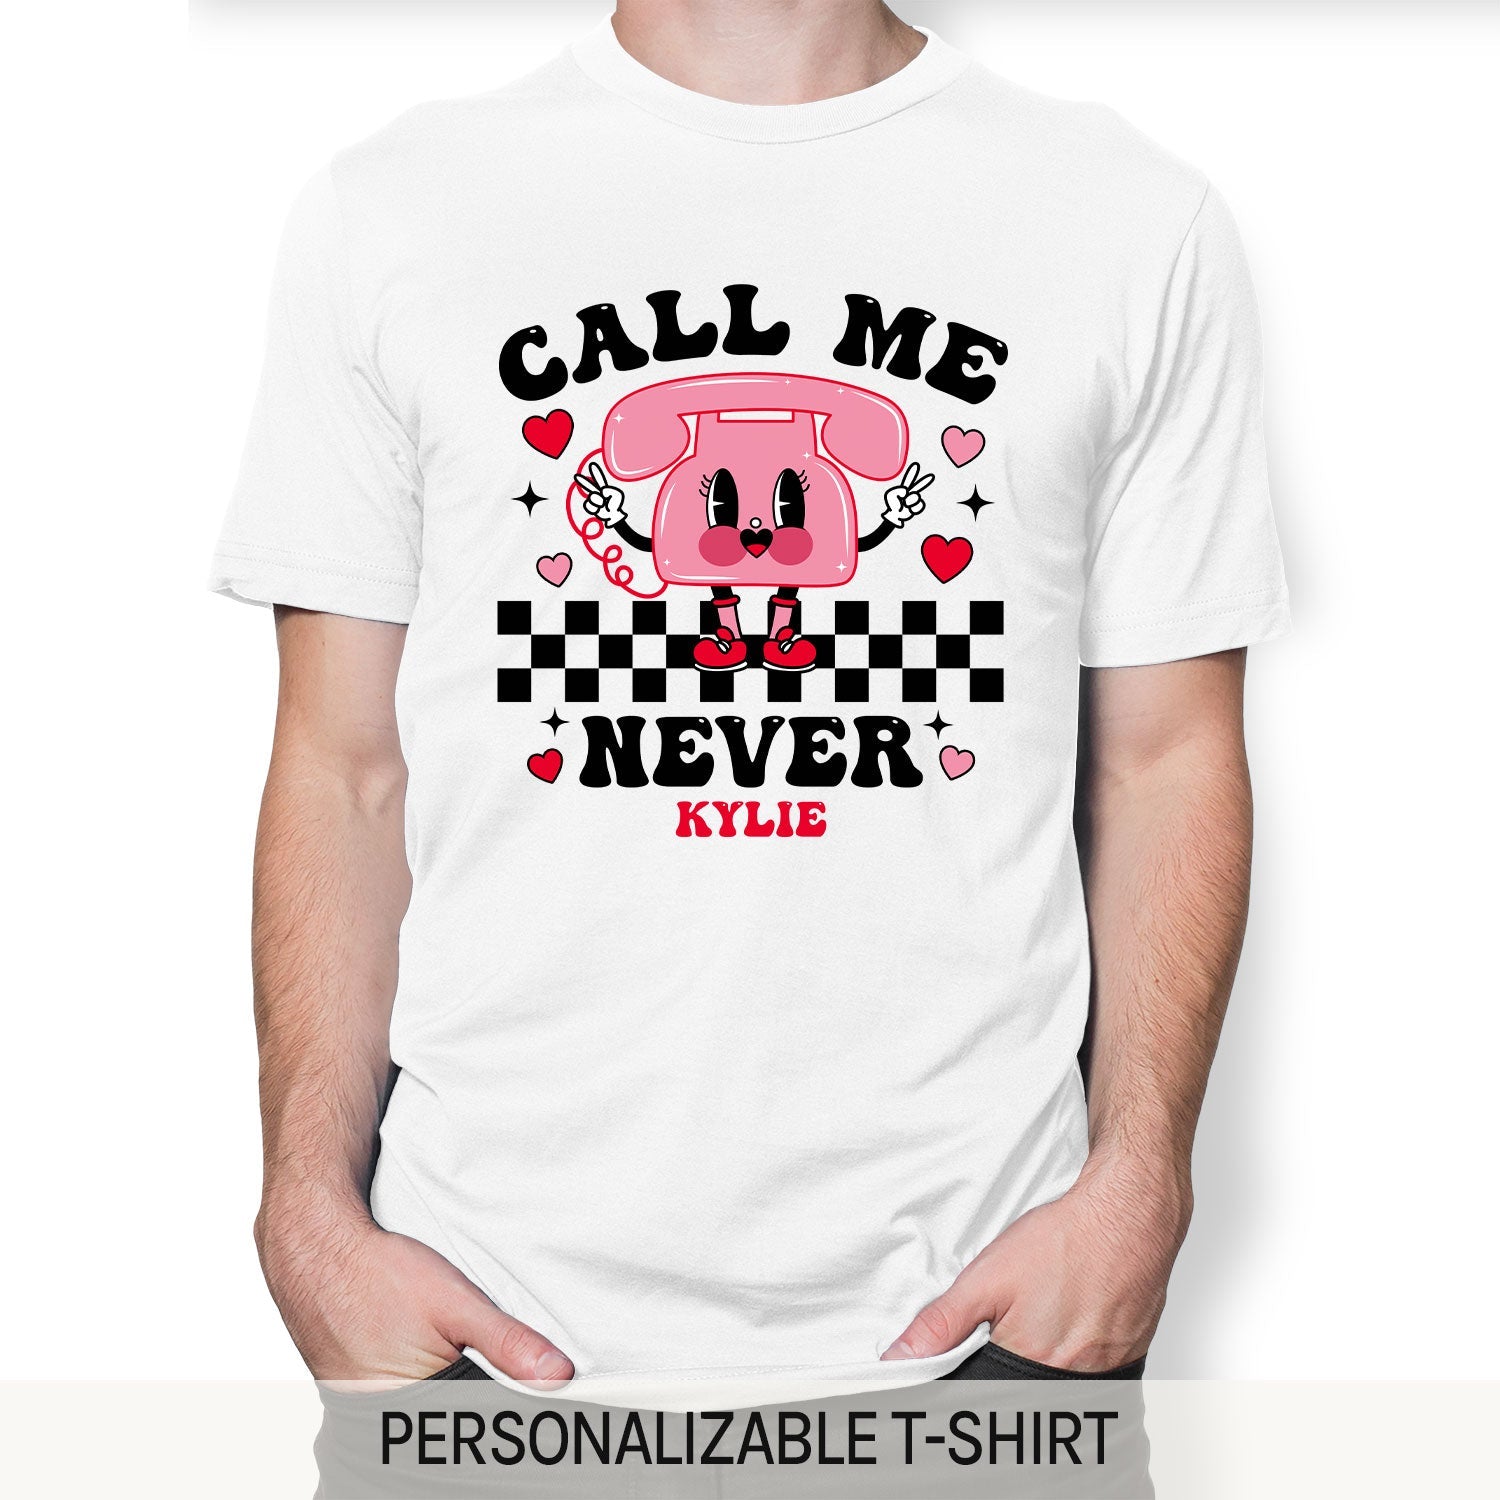 Call Me Never - Personalized Anti-Valentine's Day gift For Friends - Custom Tshirt - MyMindfulGifts